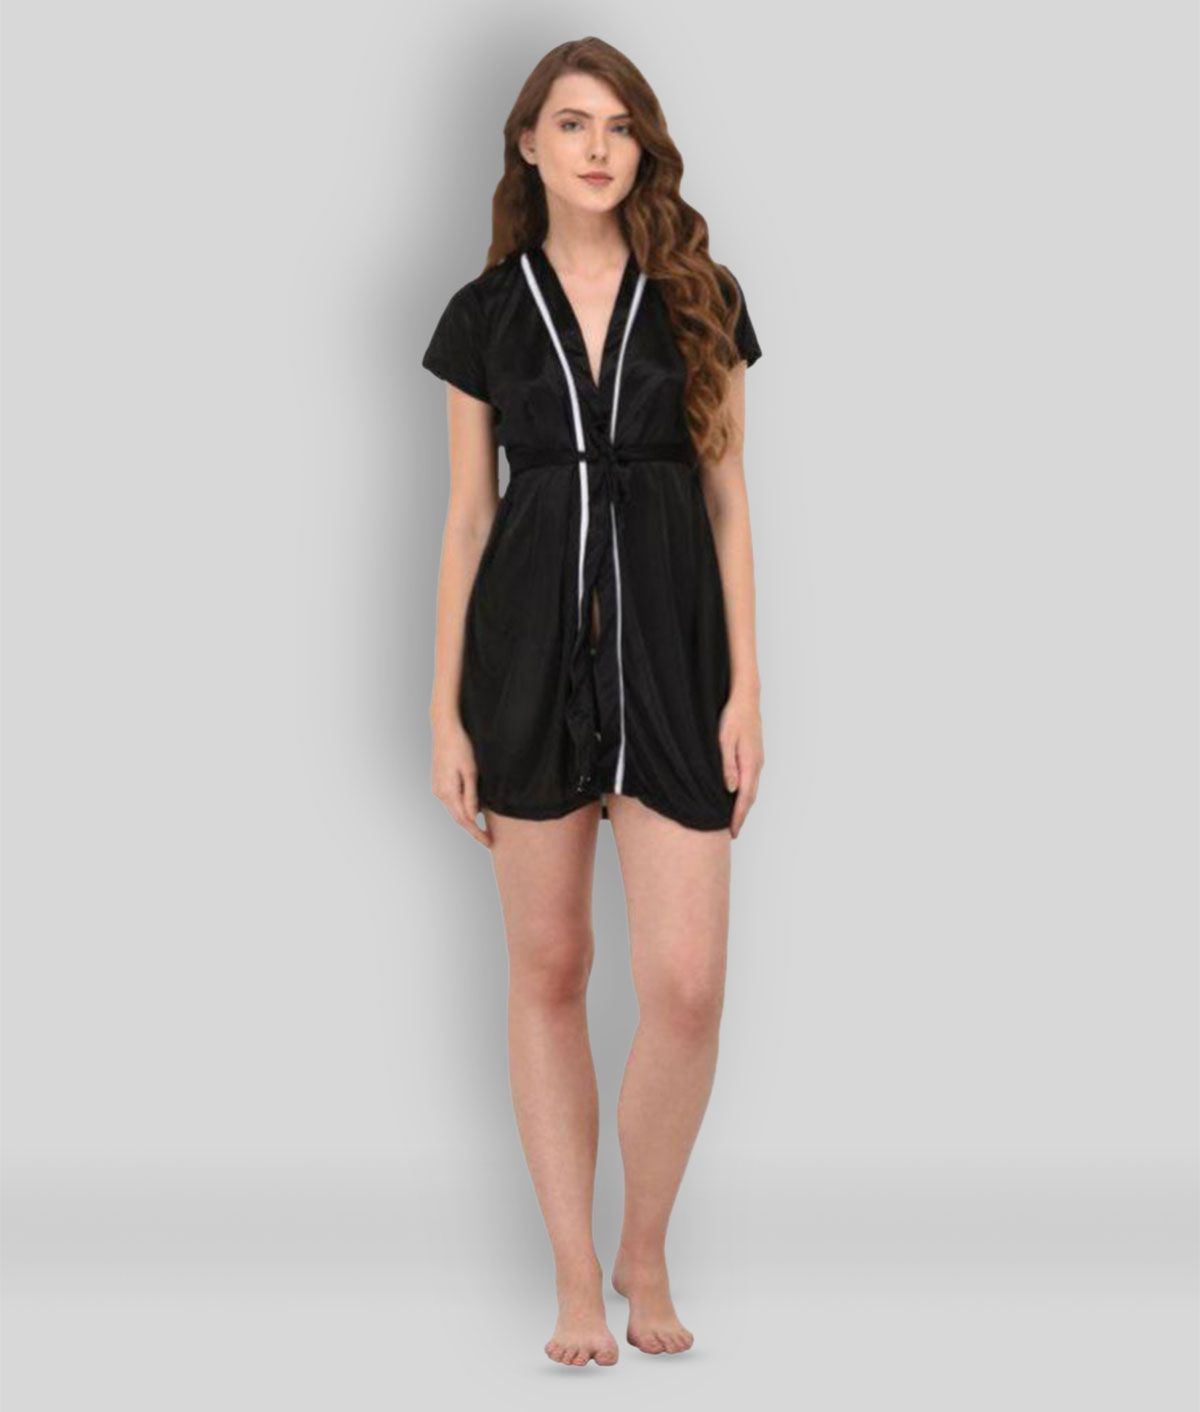     			You Forever - Black Satin Women's Nightwear Robes ( Pack of 1 )